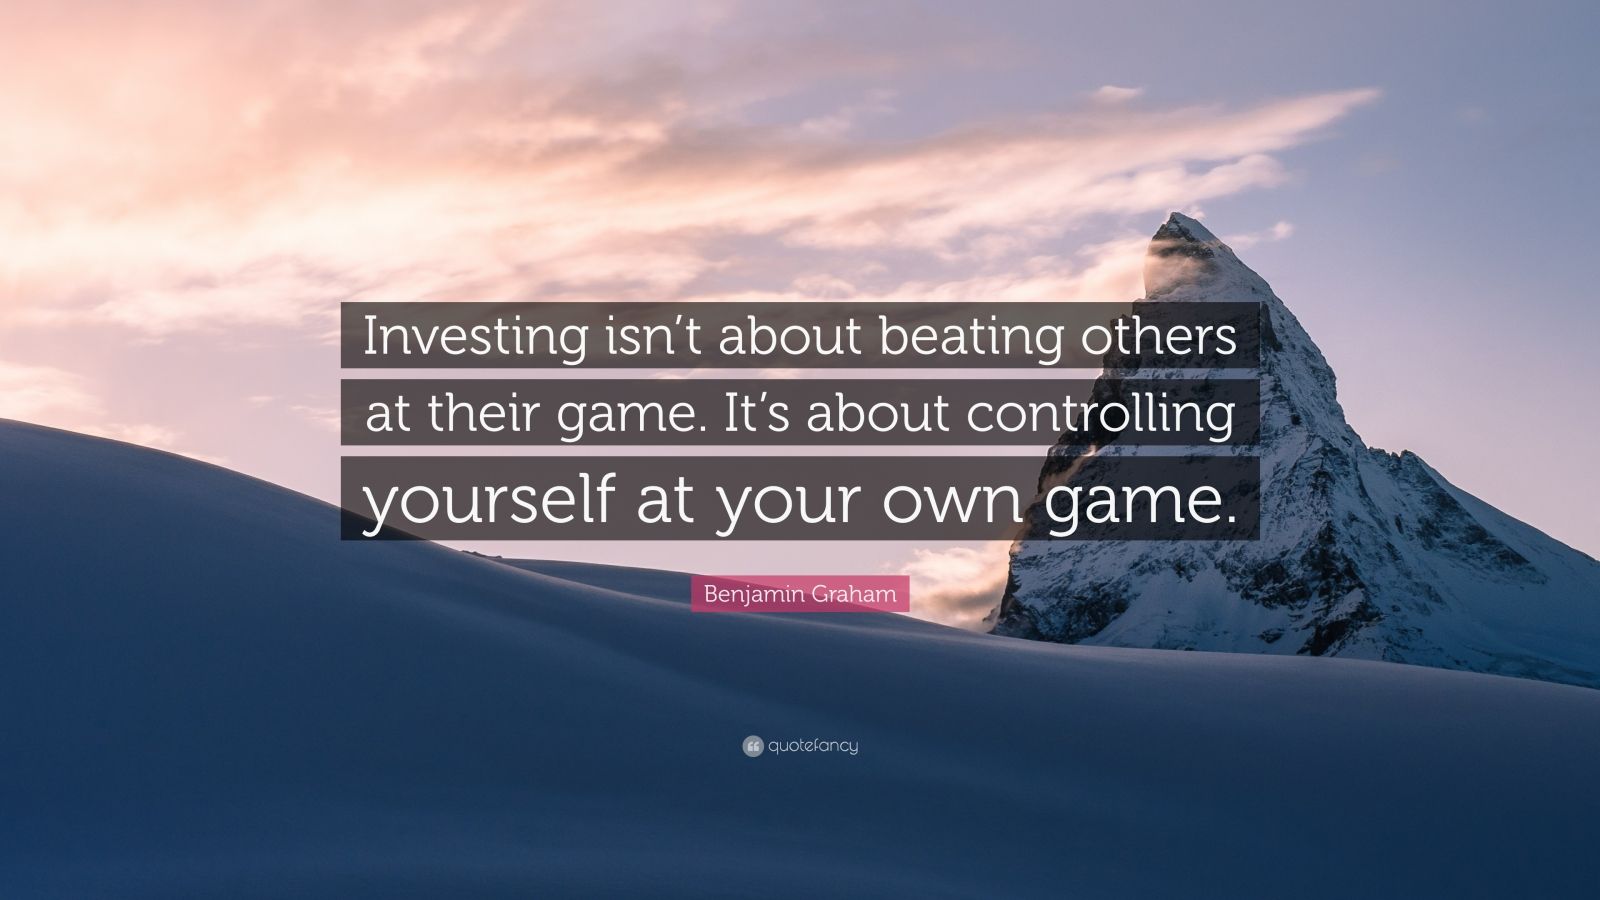 Benjamin Graham Quote “Investing isn’t about beating